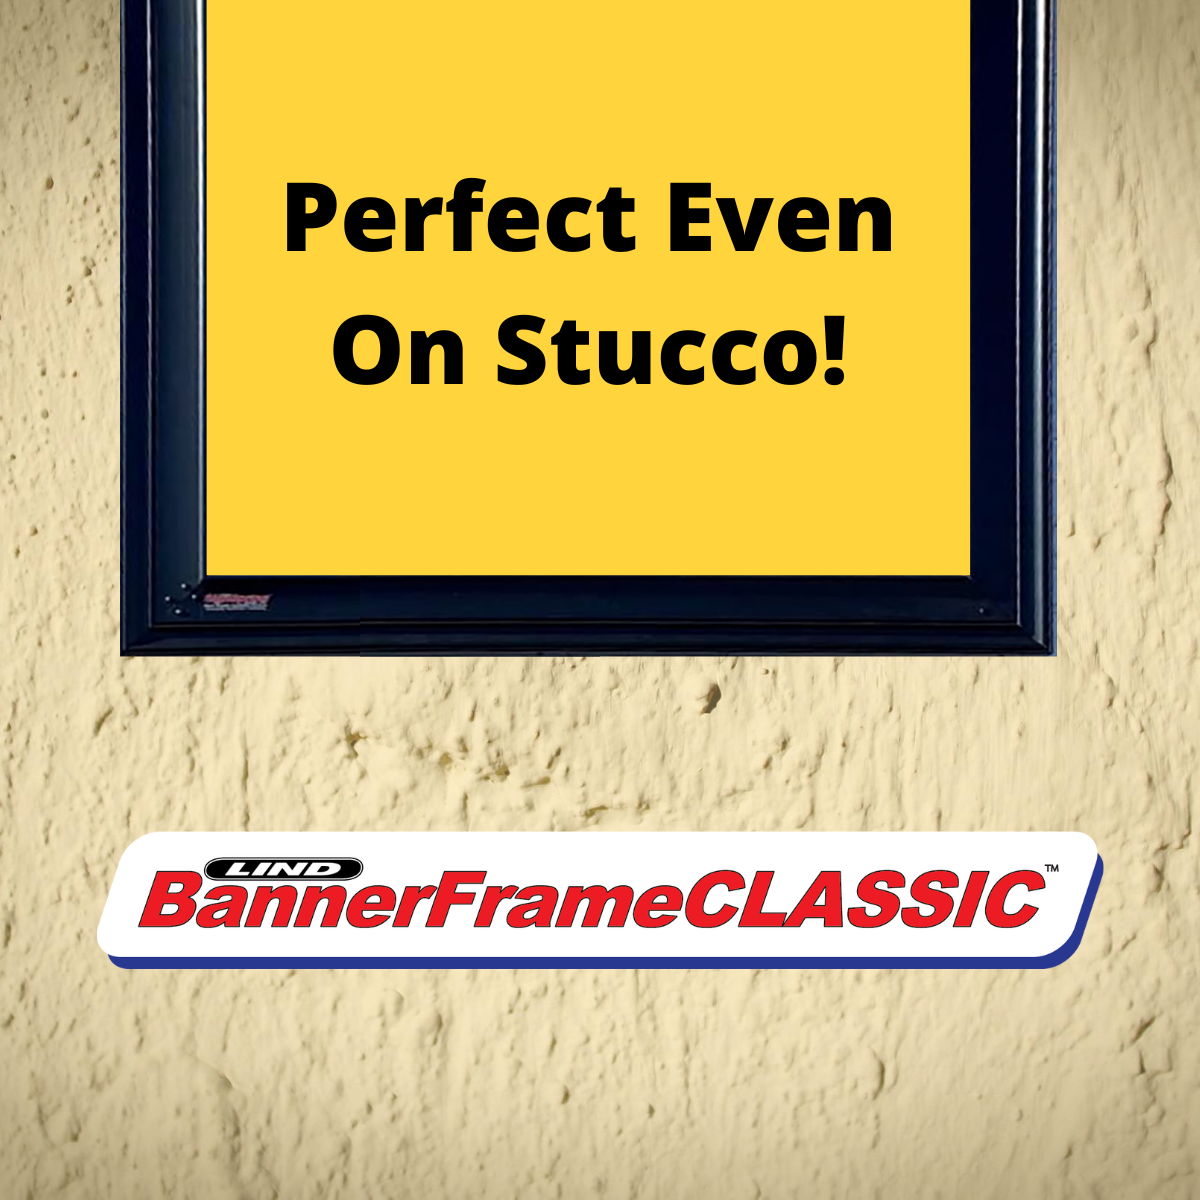 BannerFrame on Stucco-Blog Cover Image-Lind SignSpring